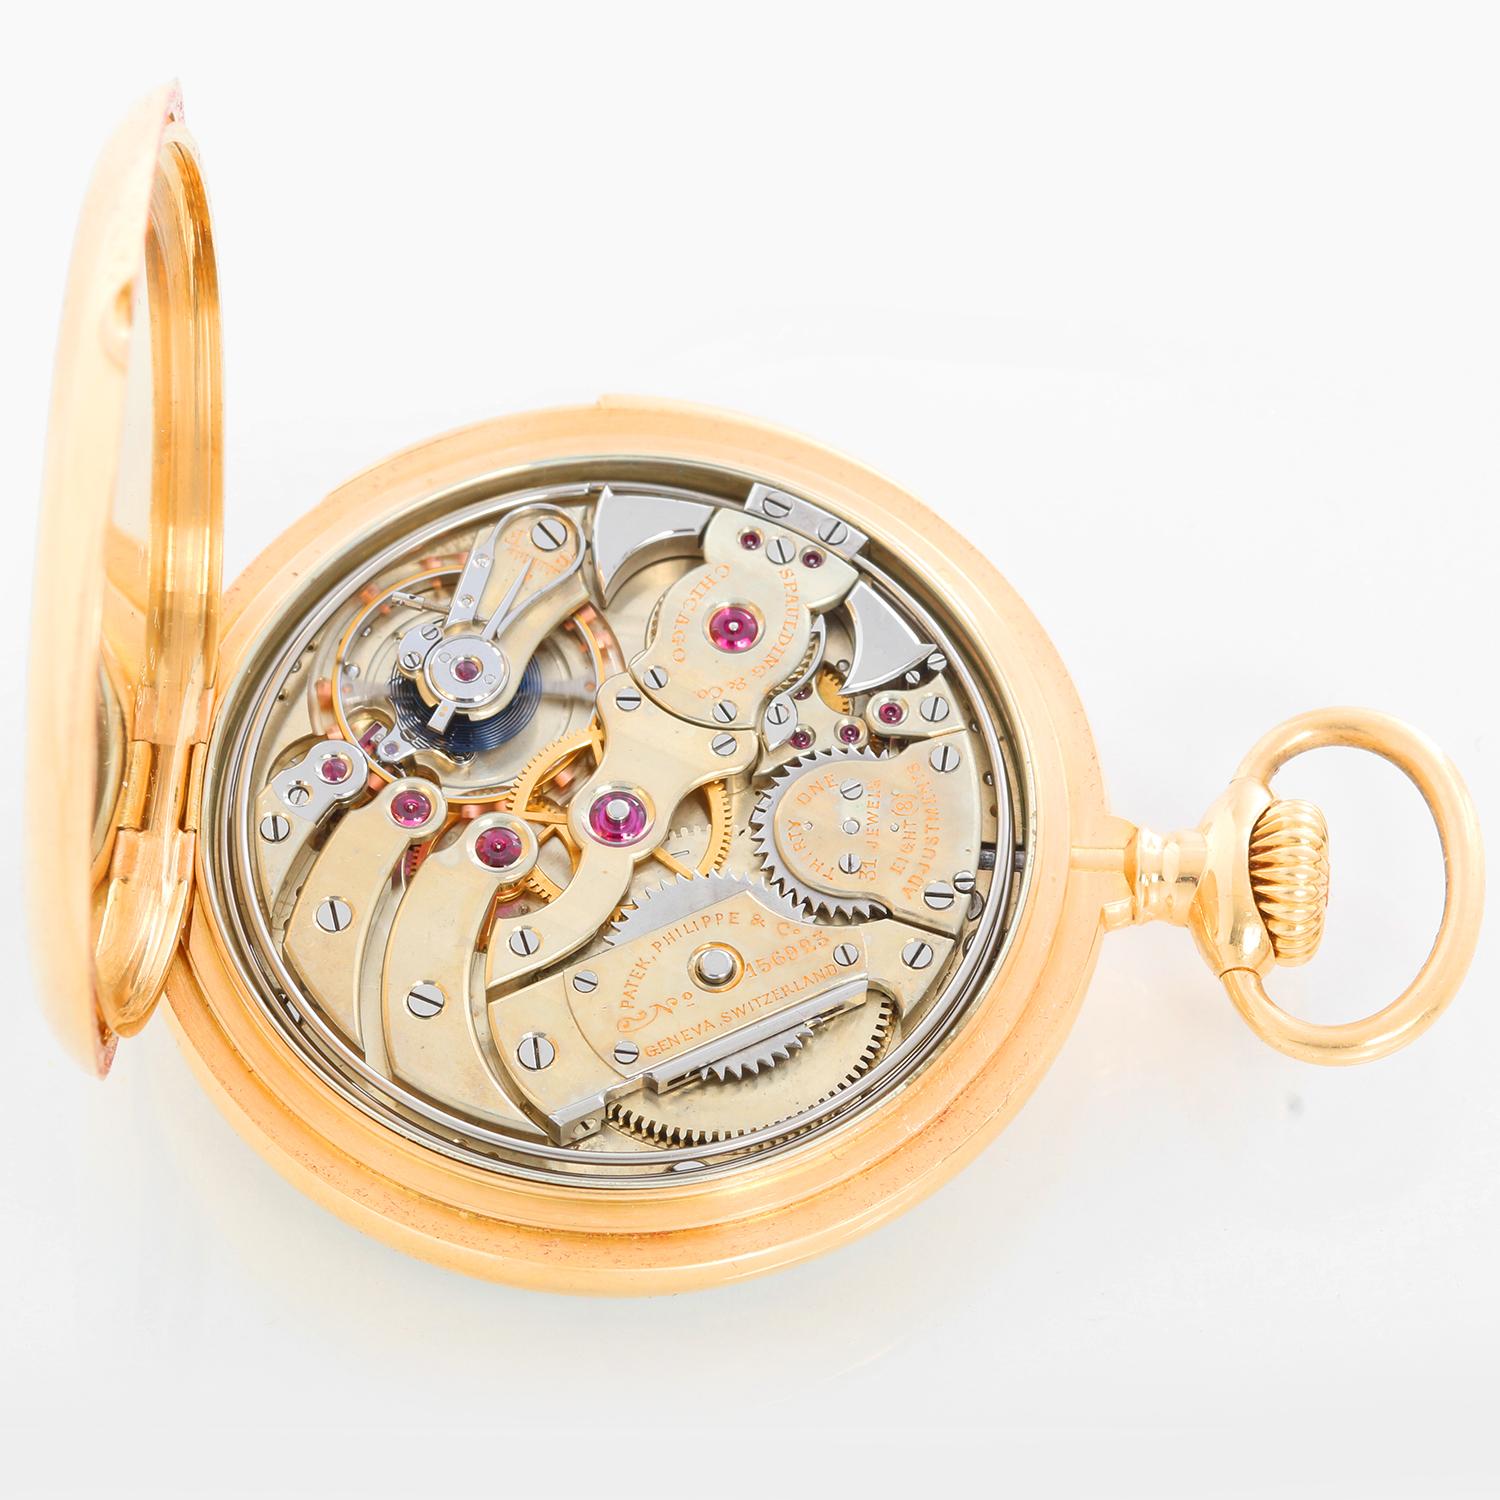 Rare Patek Phillipe Minute Repeater Men's Pocket Watch - Manual winding. 18K Yellow gold case; back cover hallmarked; dust cover engraved  